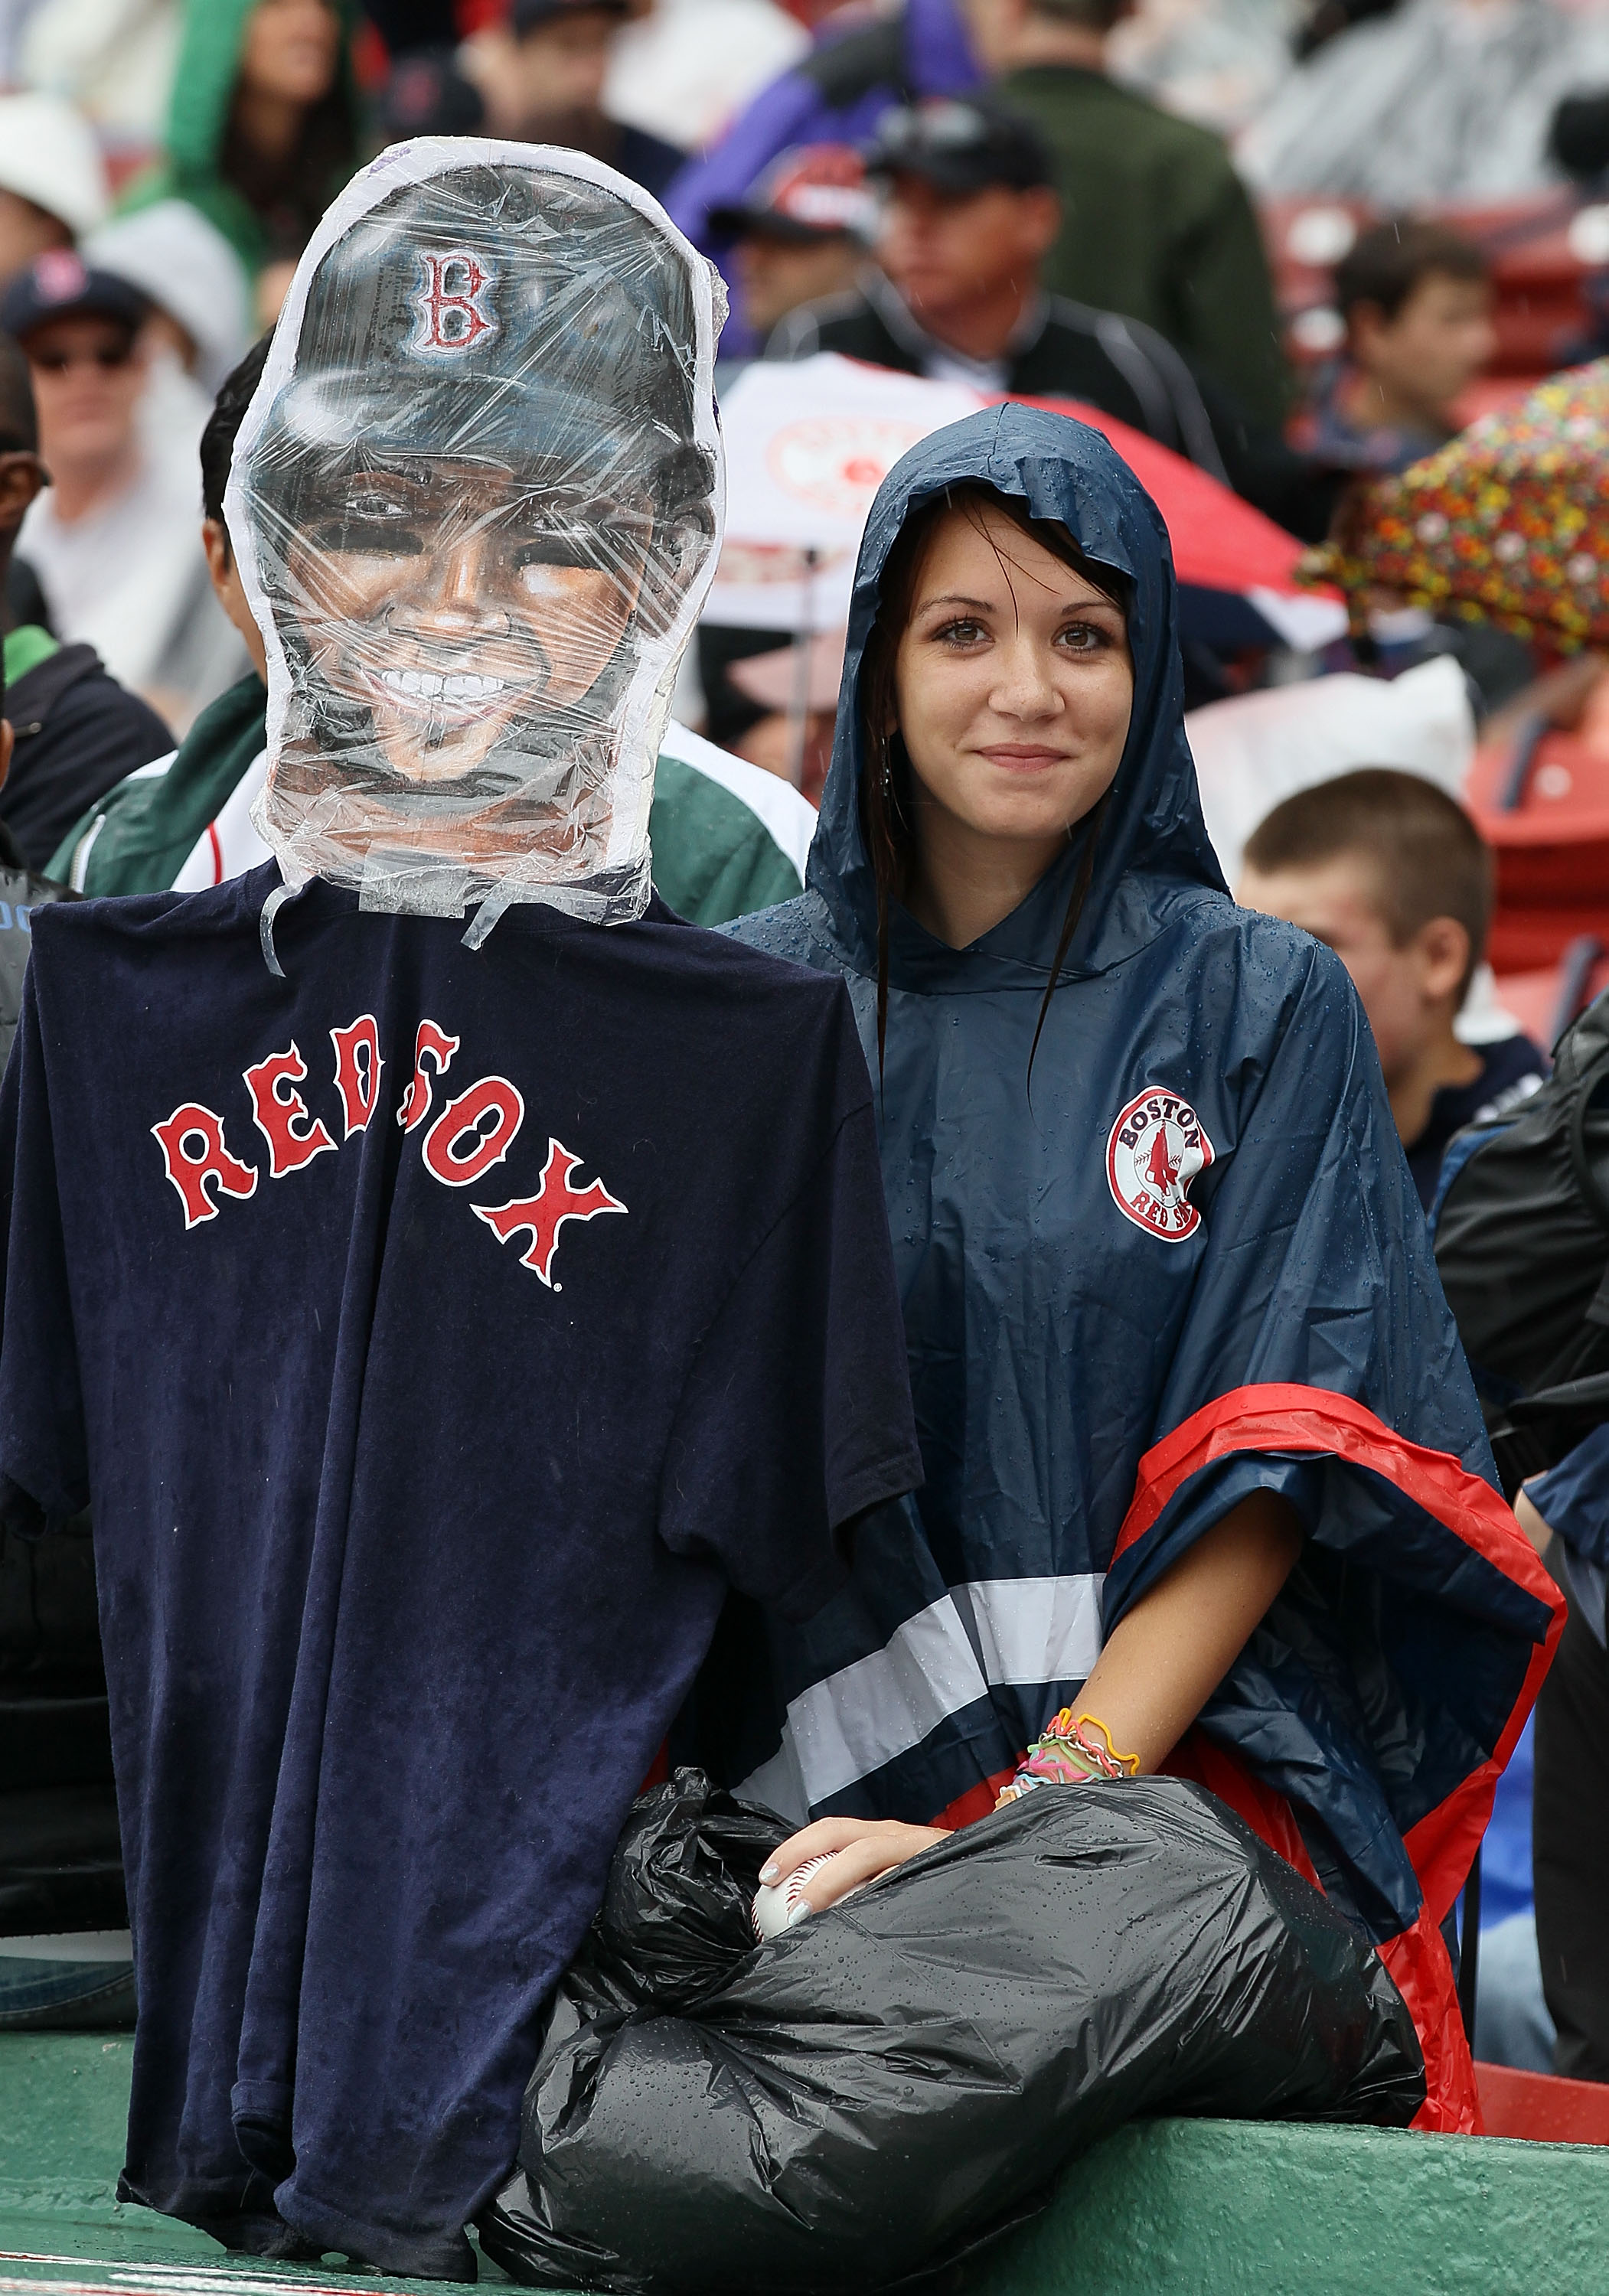 BOSTON - AUGUST 22:  Fans wait out the rain delay for the Toronto Blue Jays versus the Boston Red Sox game on August 22, 2010 at Fenway Park in Boston, Massachusetts.  (Photo by Elsa/Getty Images)